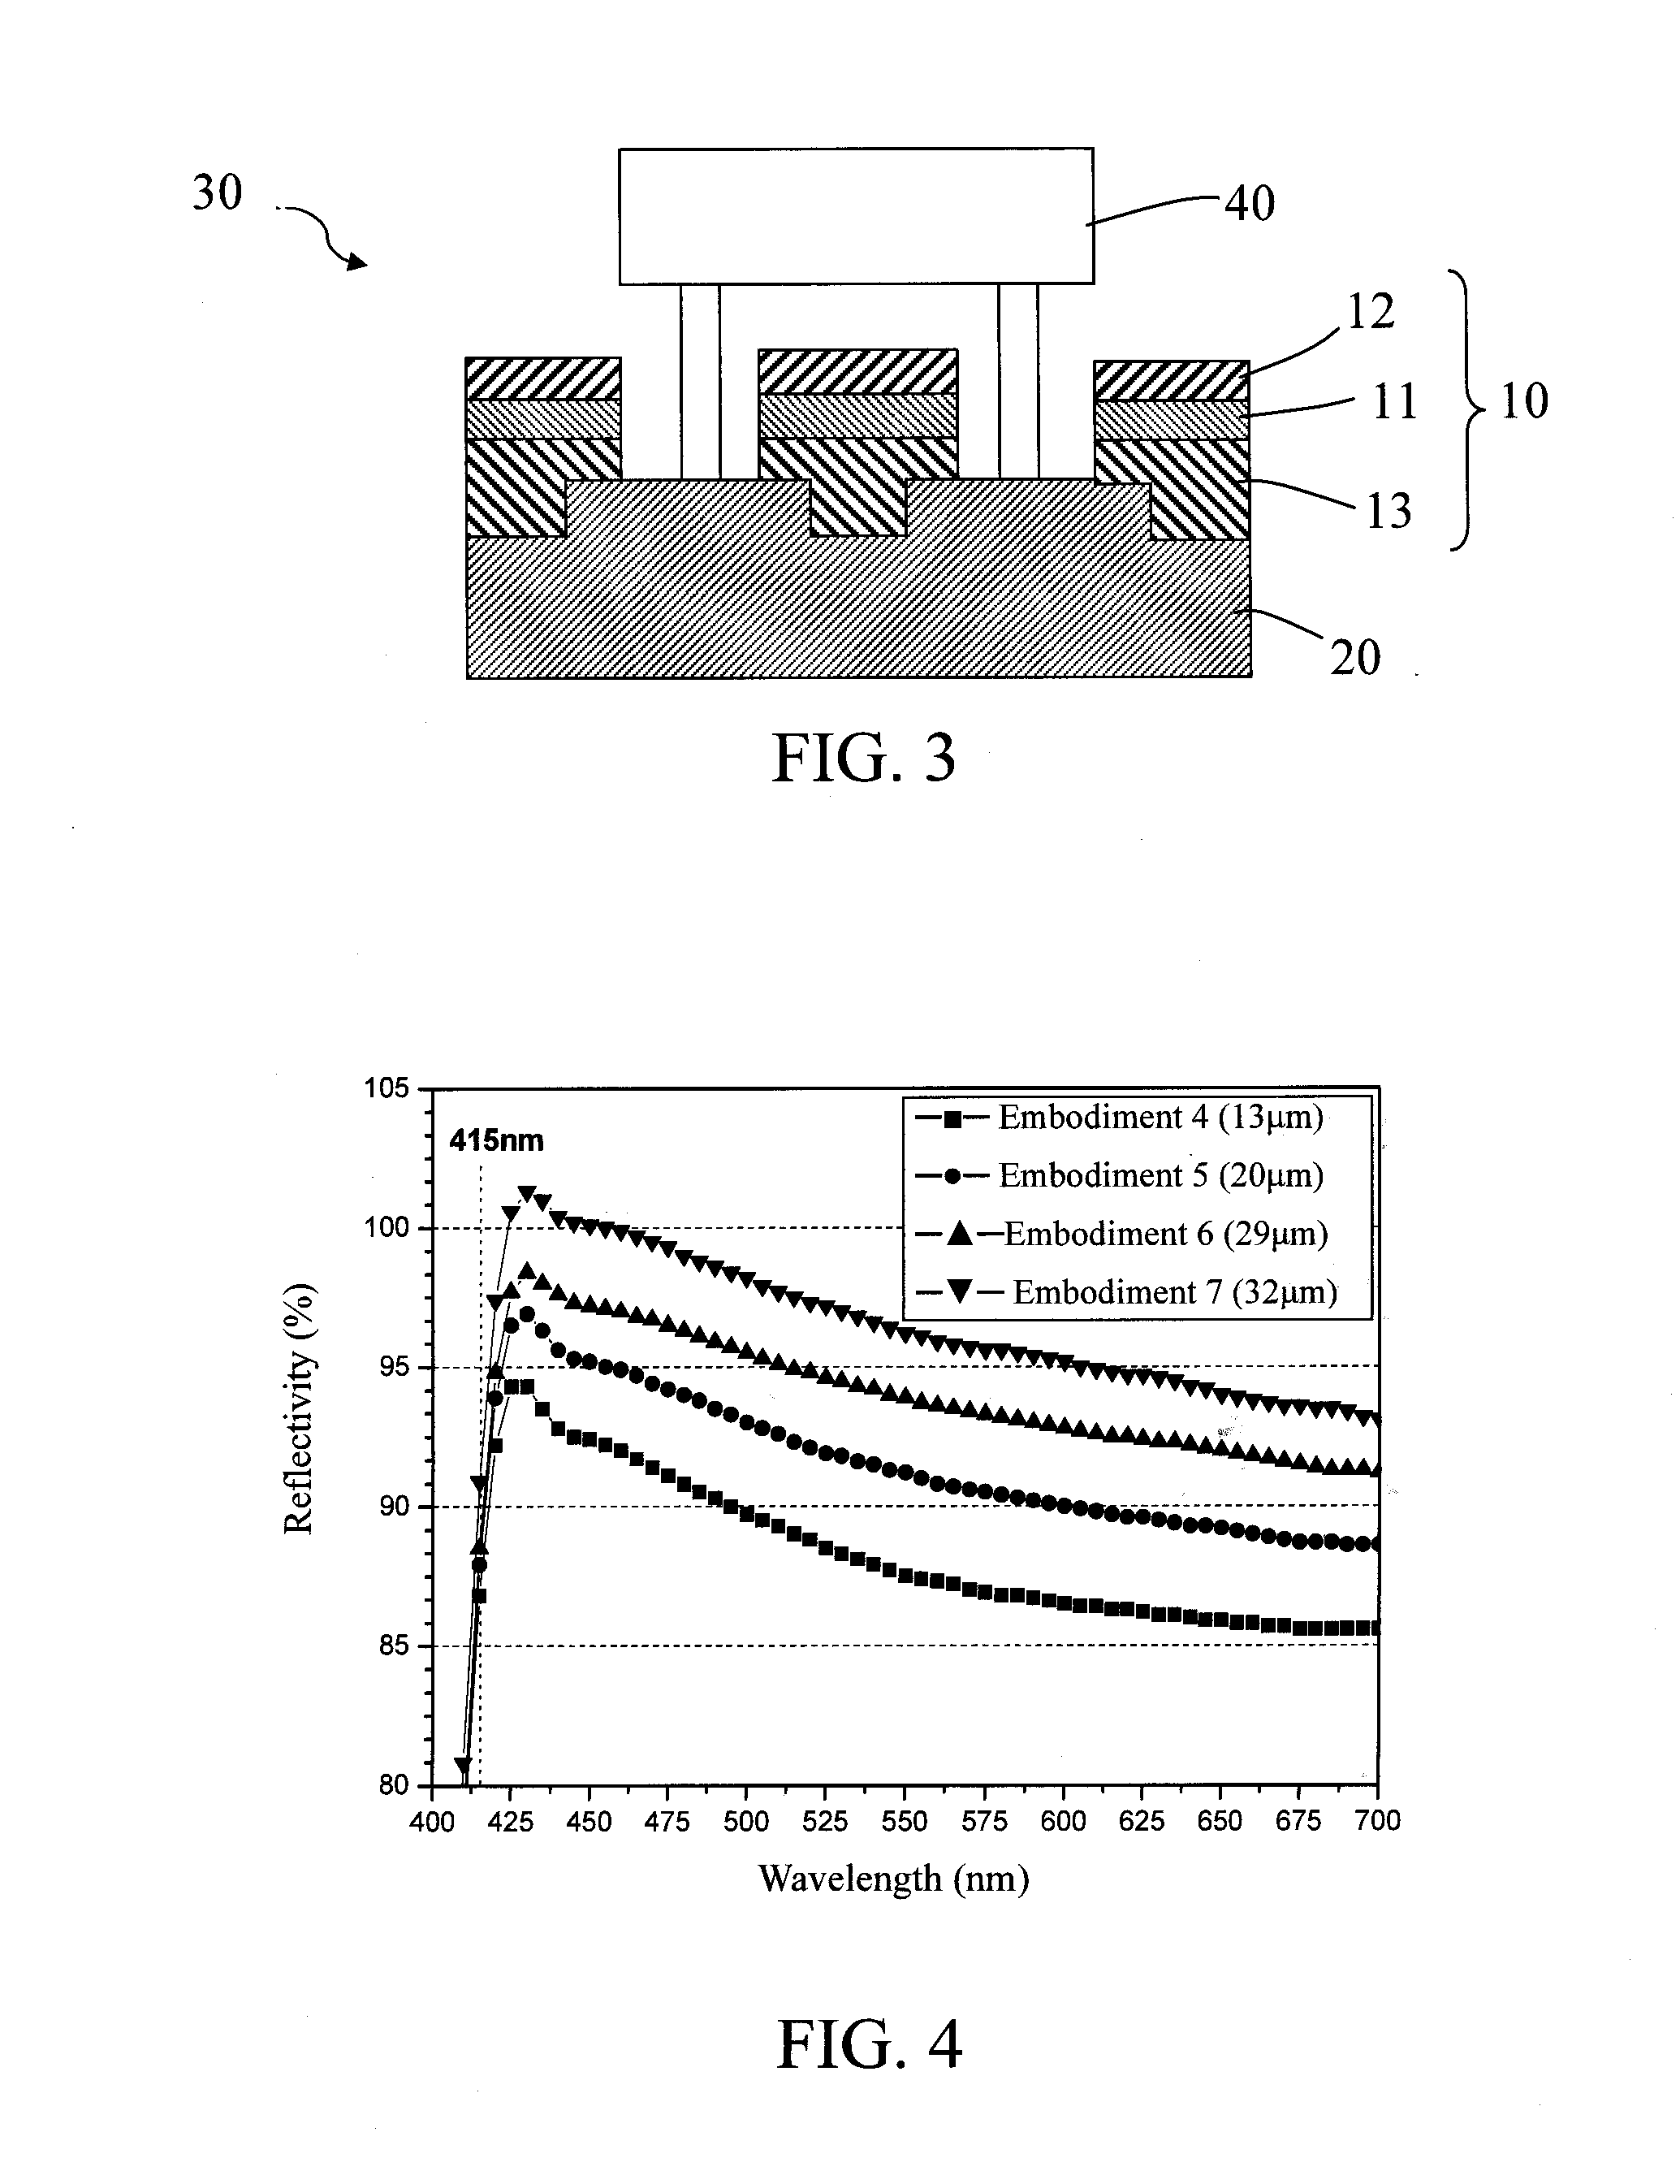 Cover layer with high thermal resistance and high reflectivity for a printed circuit board